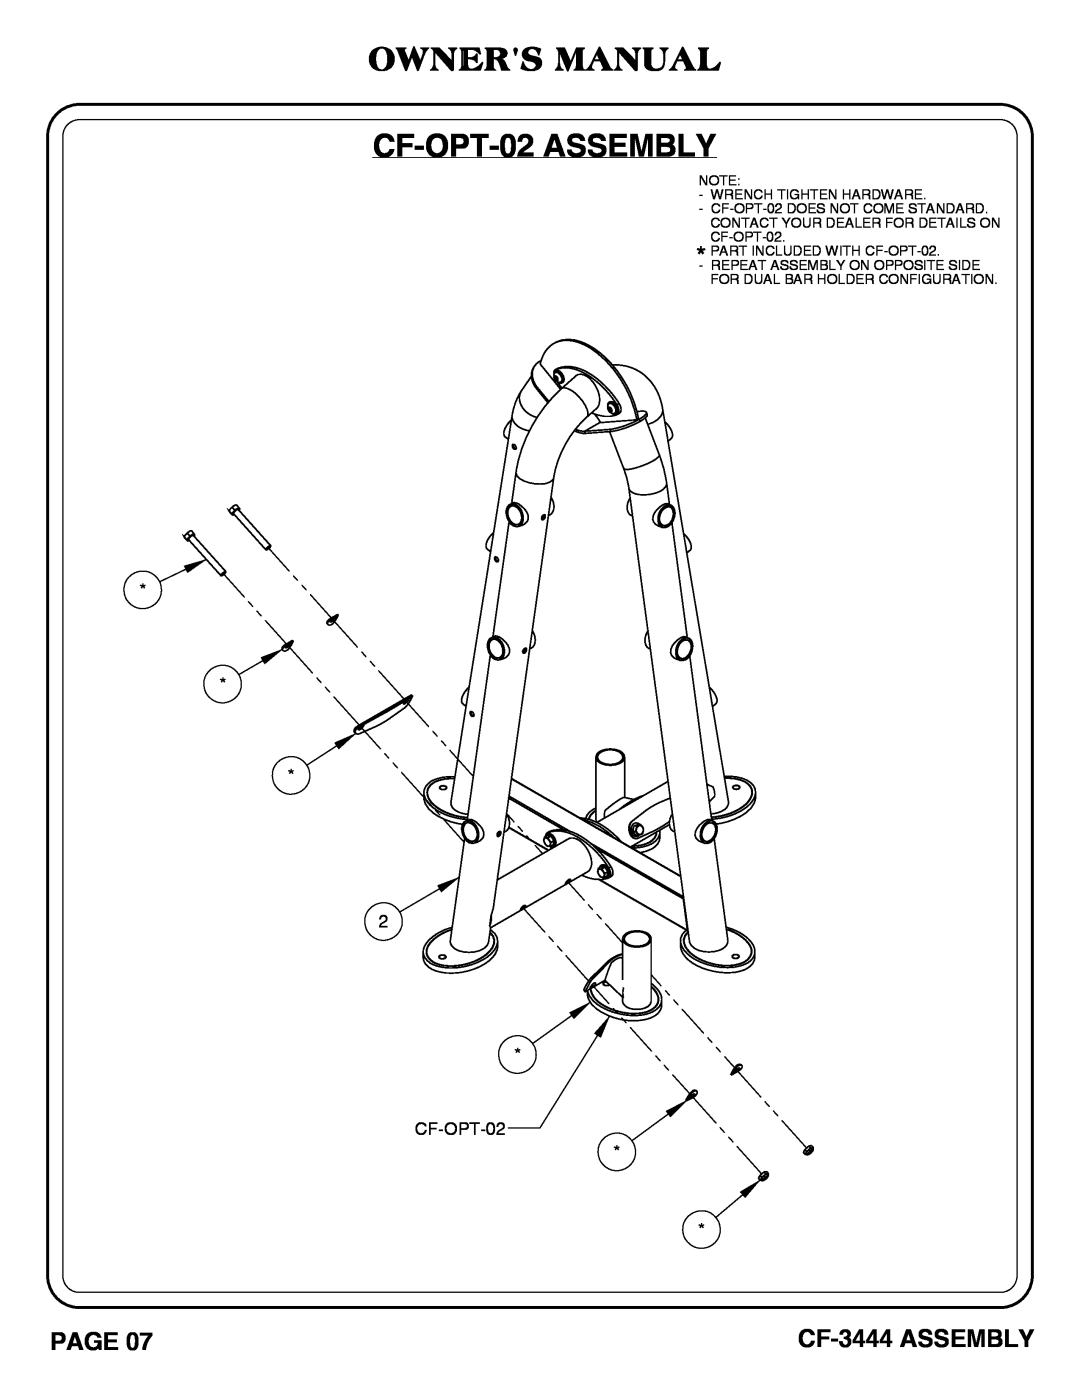 Hoist Fitness cf-3444 owner manual OWNERS MANUAL CF-OPT-02 ASSEMBLY, CF-3444 ASSEMBLY 